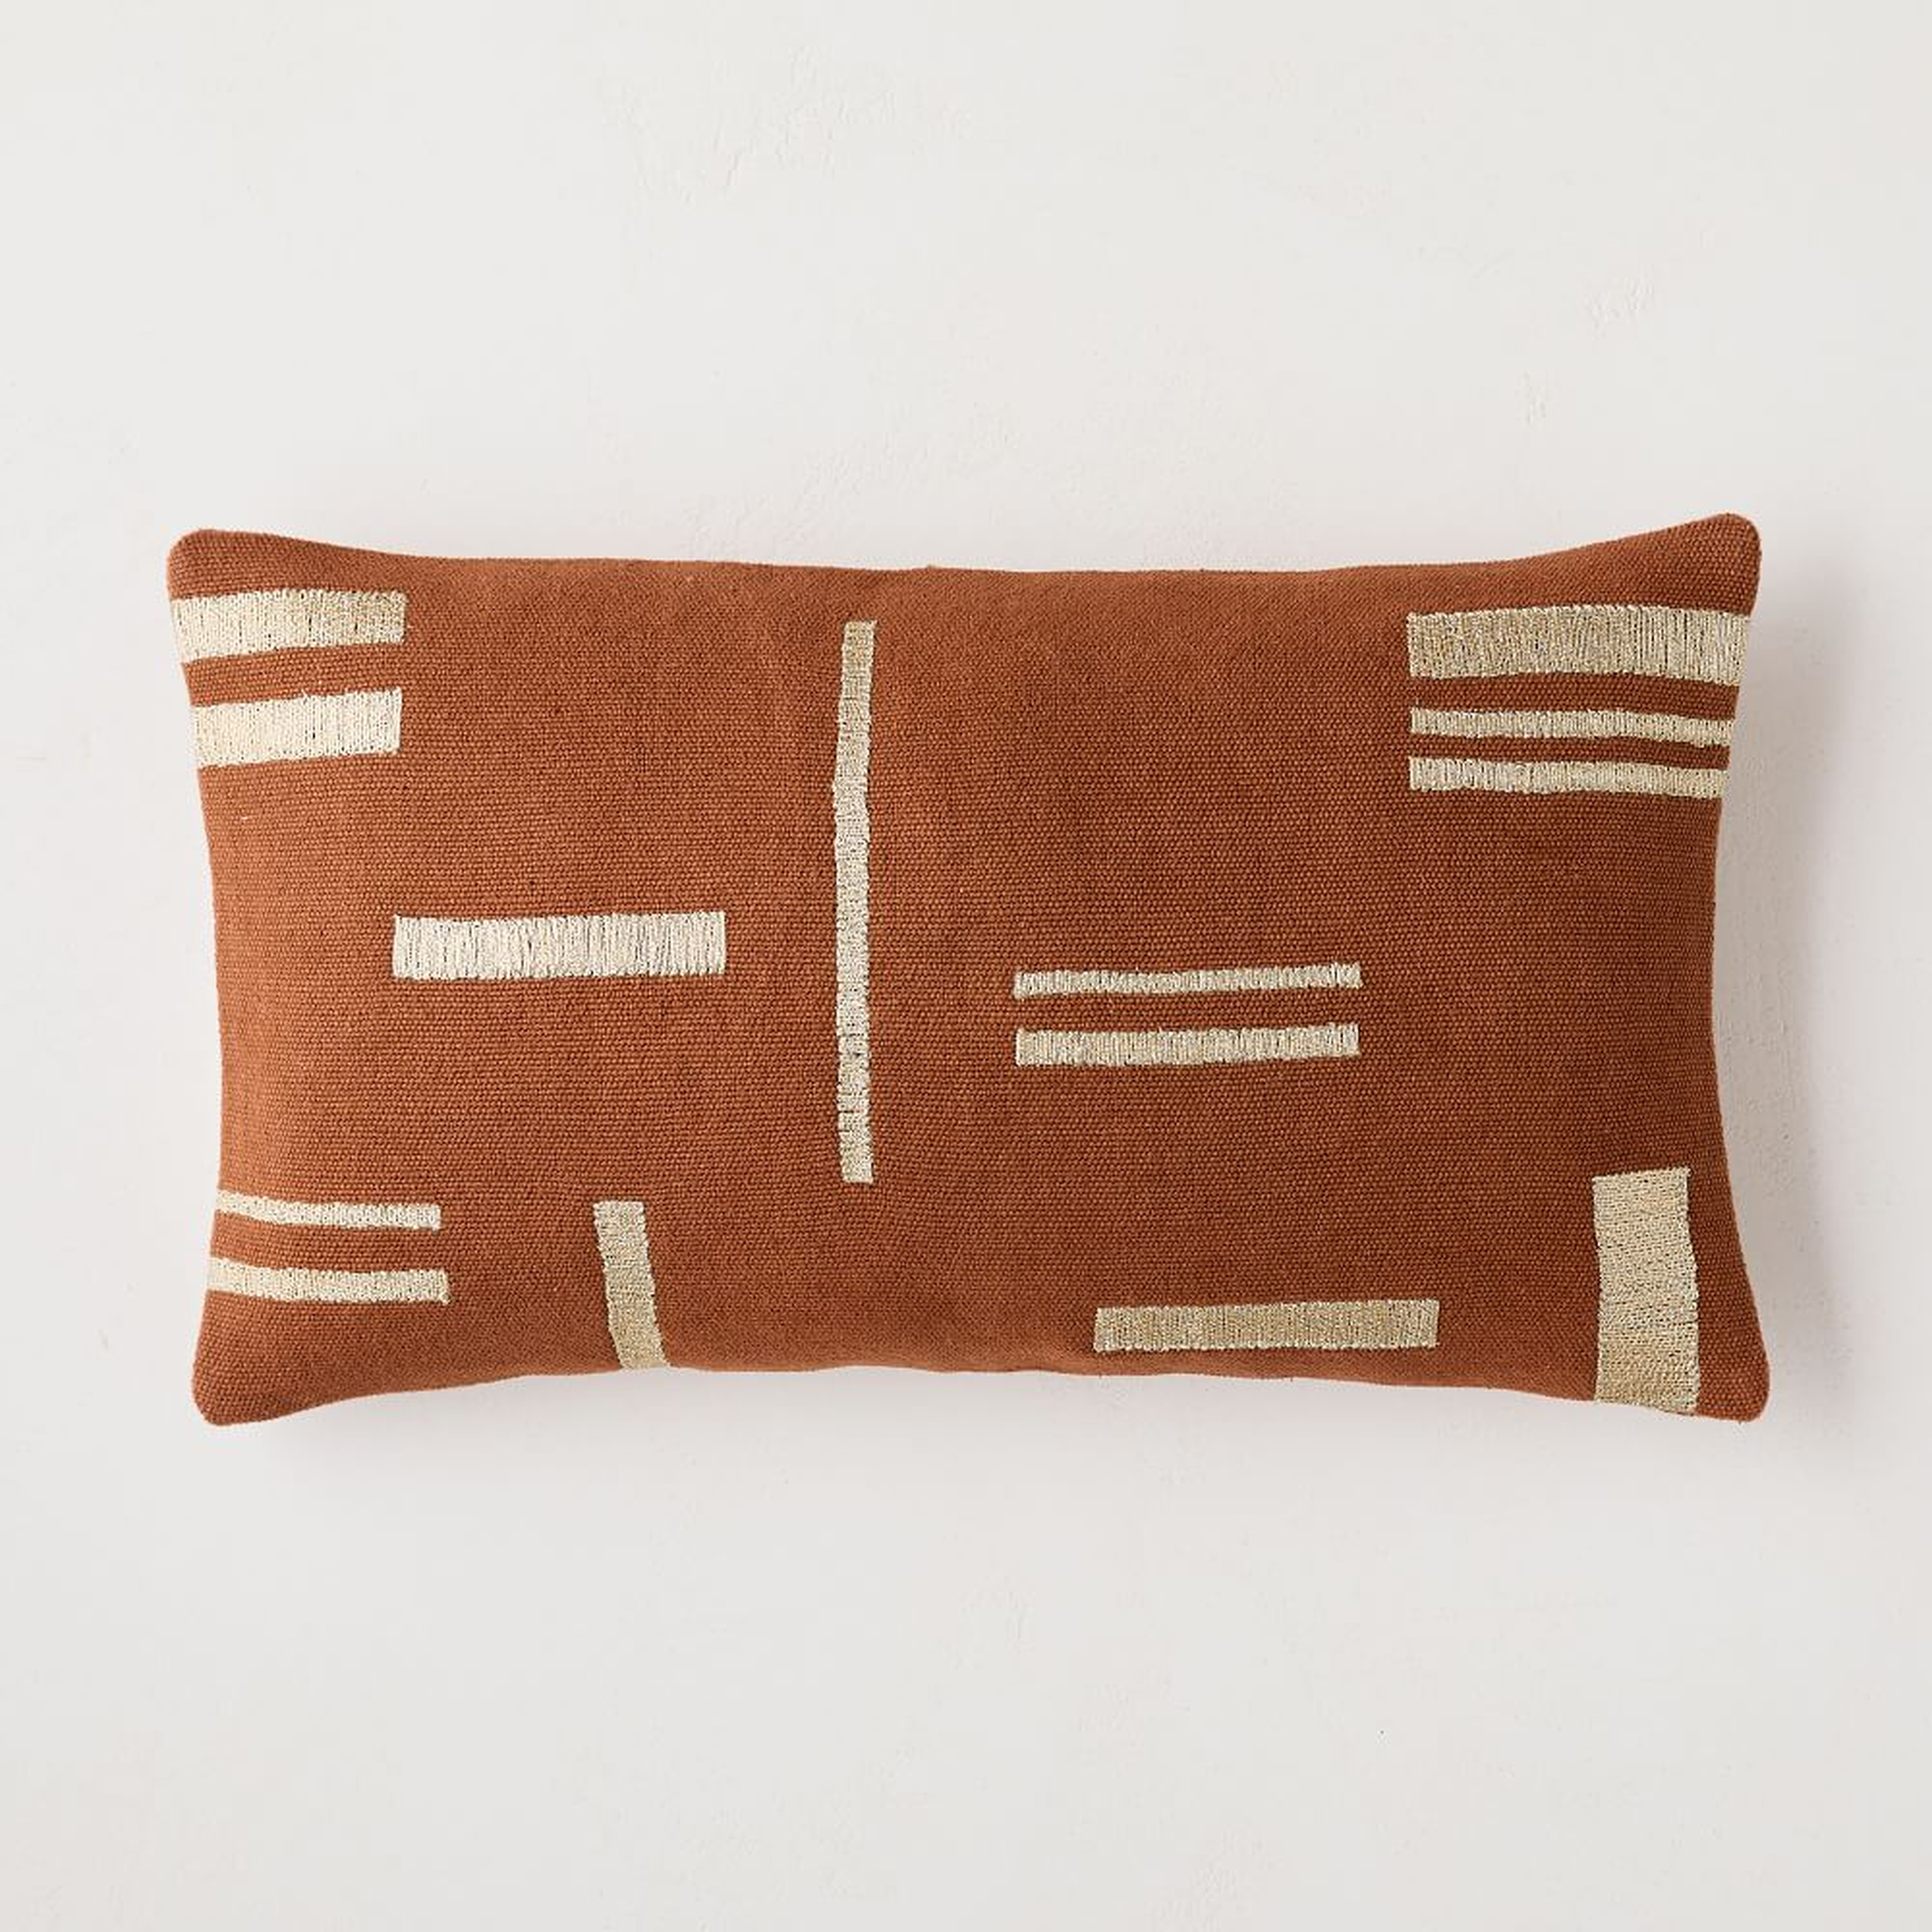 Embroidered Metallic Blocks Pillow Cover, Copper Rust, pair - West Elm